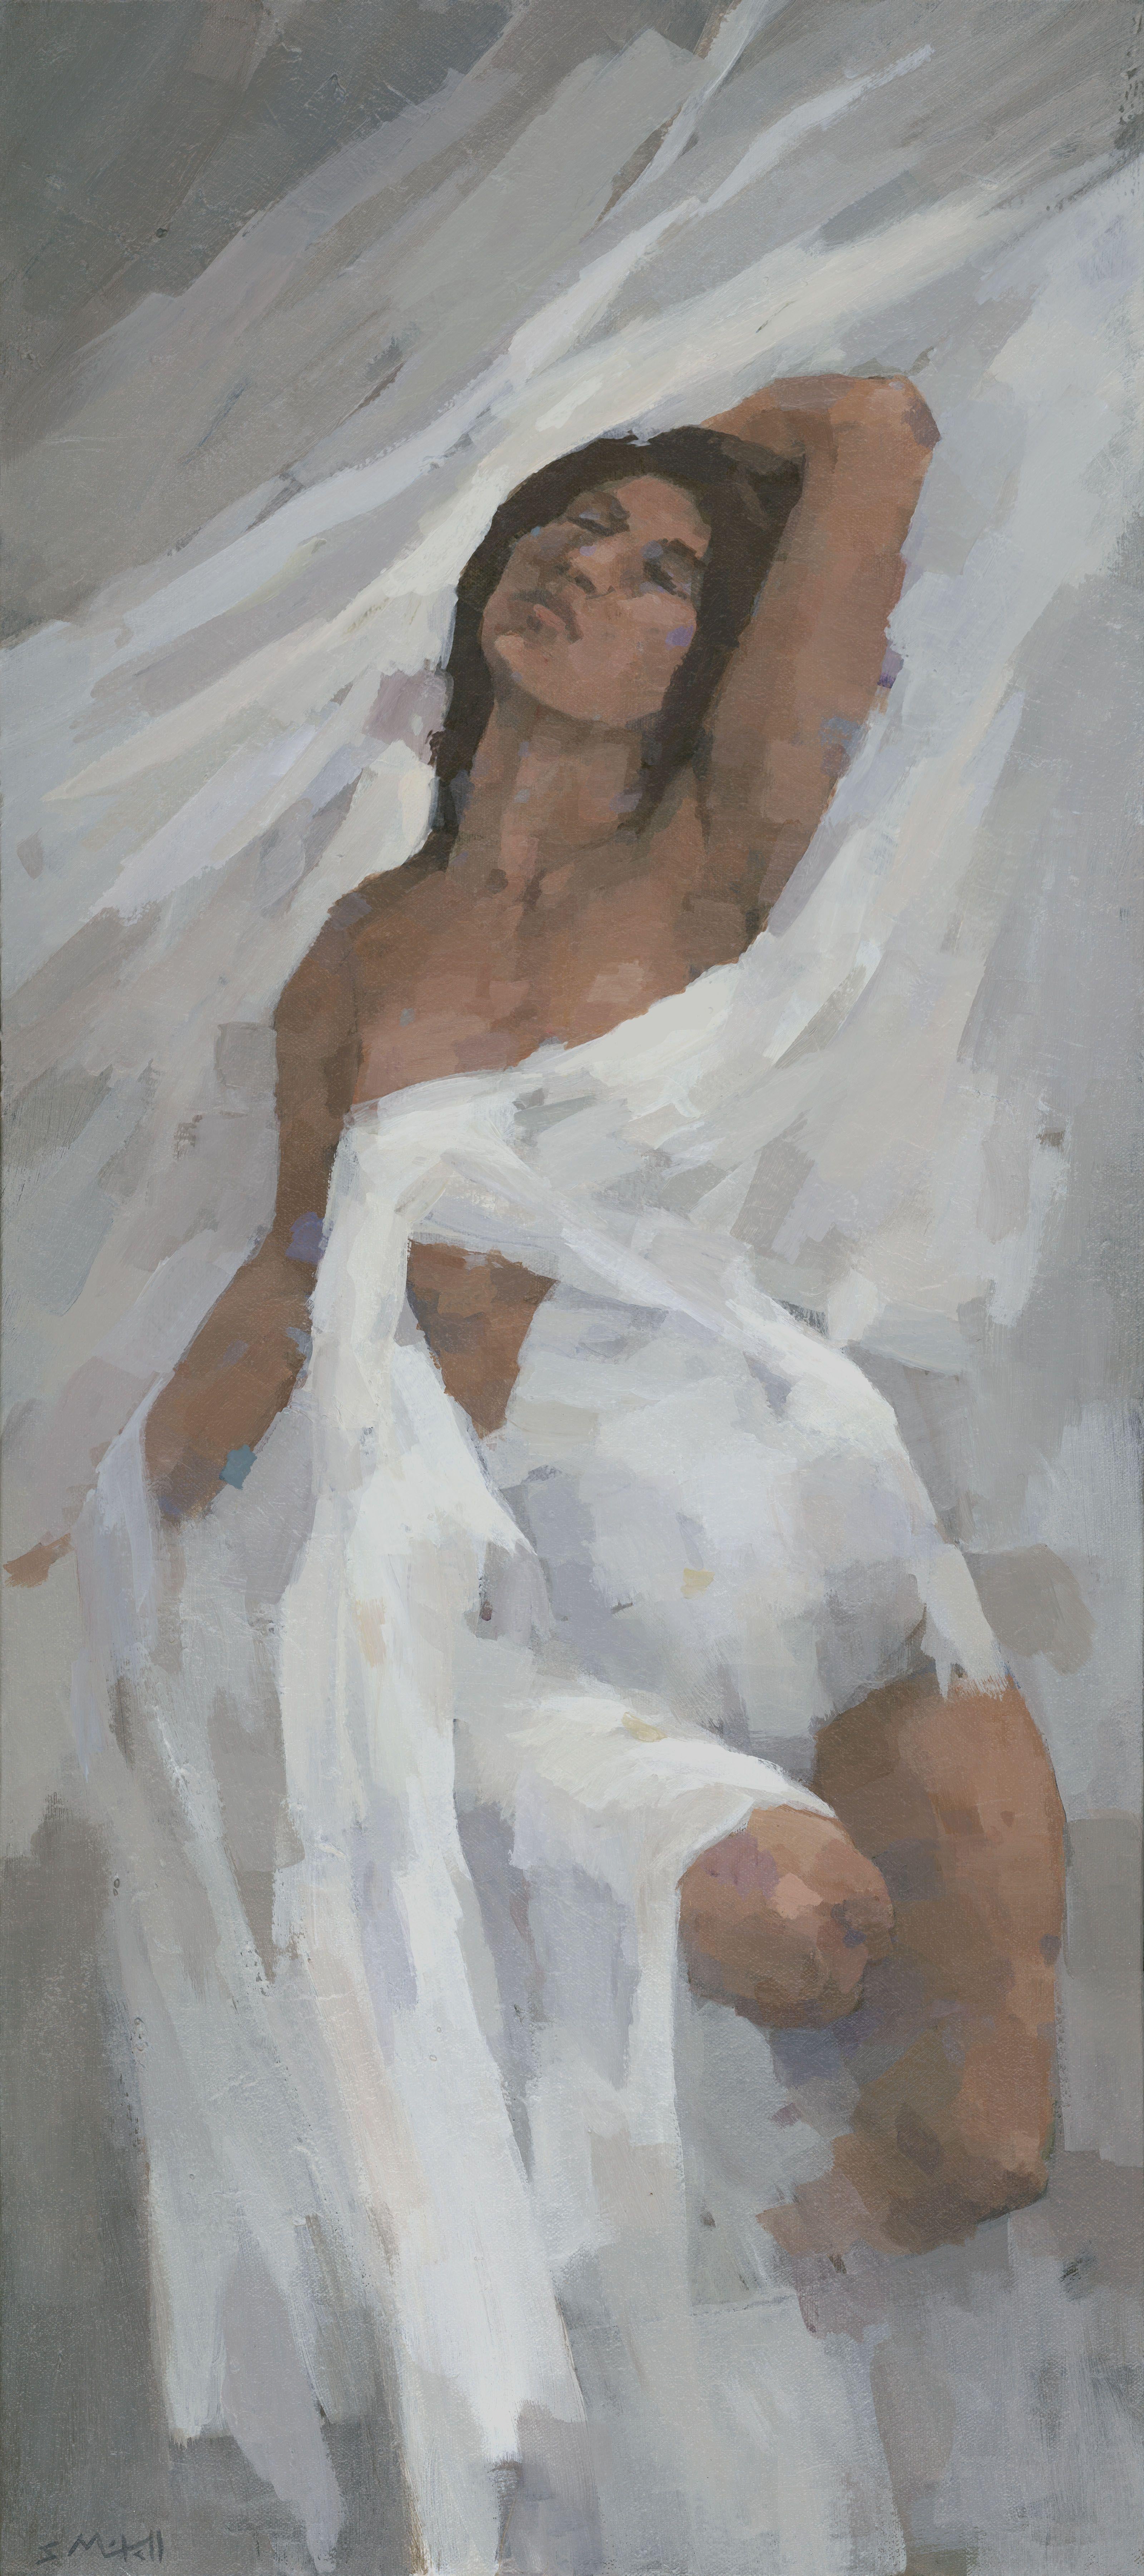 This female figure painting portrays the model in an ethereal state of release or escape. I used a harmonizing palette of whites, browns and greys. The painting is on deep profile canvas, with the sides of the canvas painted a light grey to match